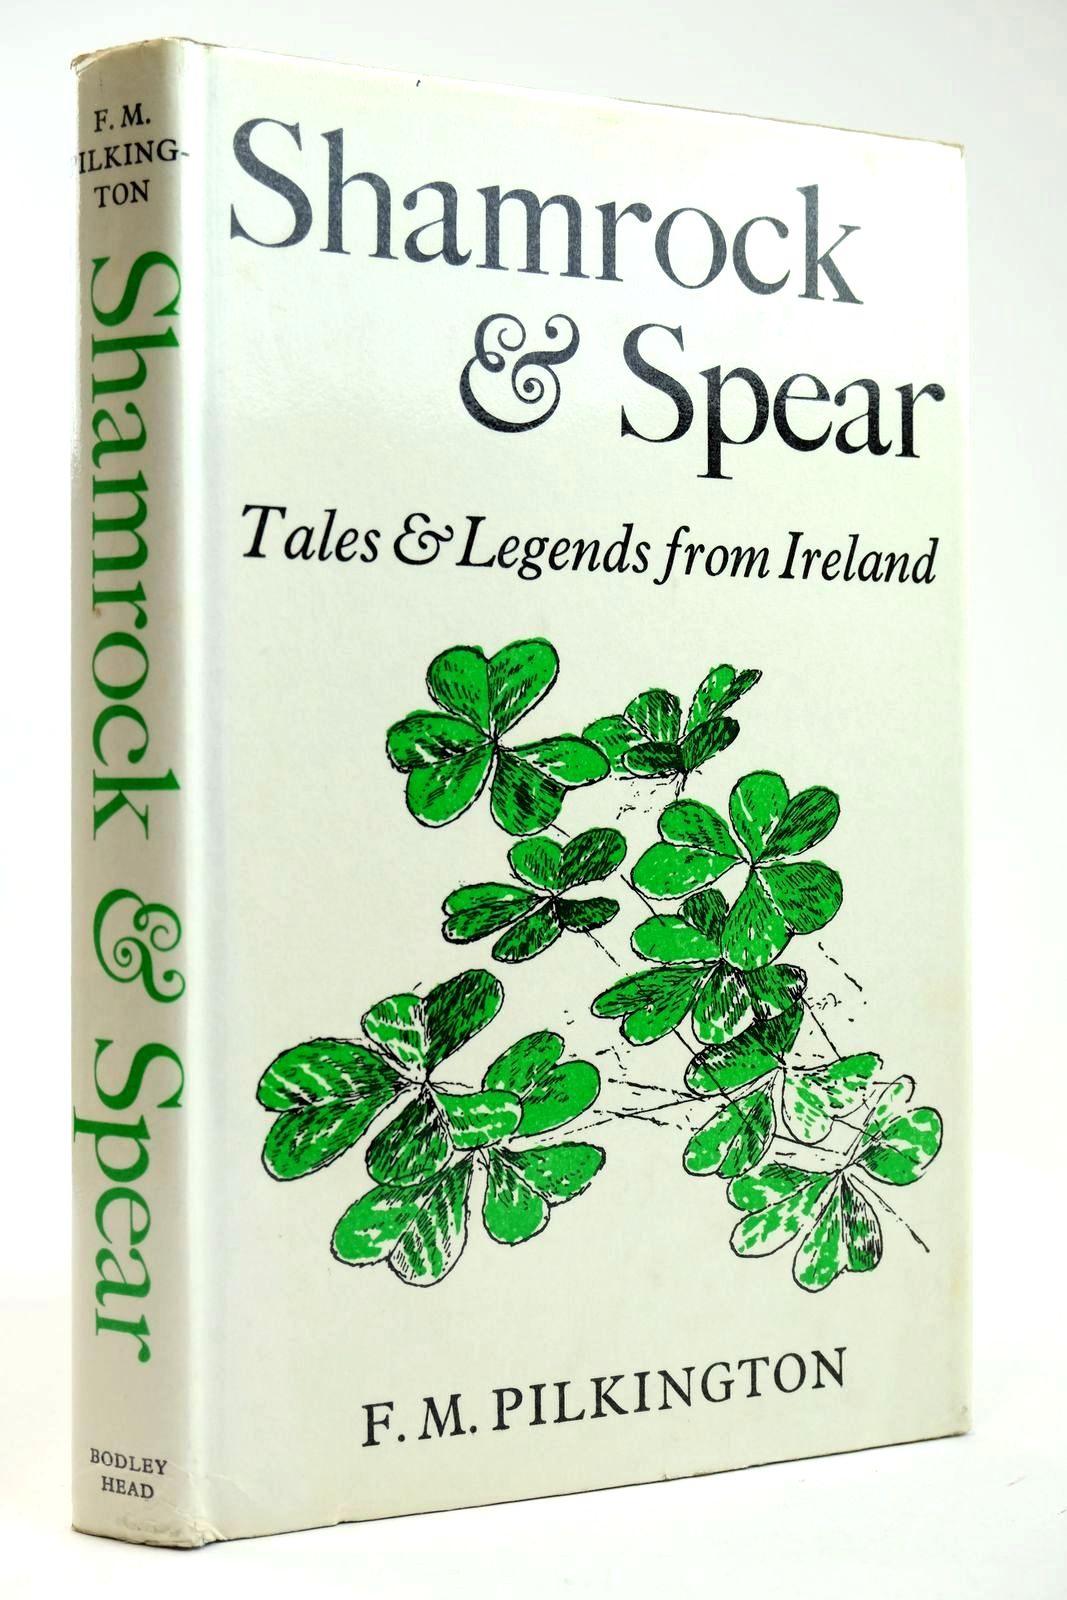 Photo of SHAMROCK AND SPEAR TALES AND LEGENDS FROM IRELAND written by Pilkington, F.M. illustrated by Spencer, Roy published by The Bodley Head (STOCK CODE: 2132483)  for sale by Stella & Rose's Books